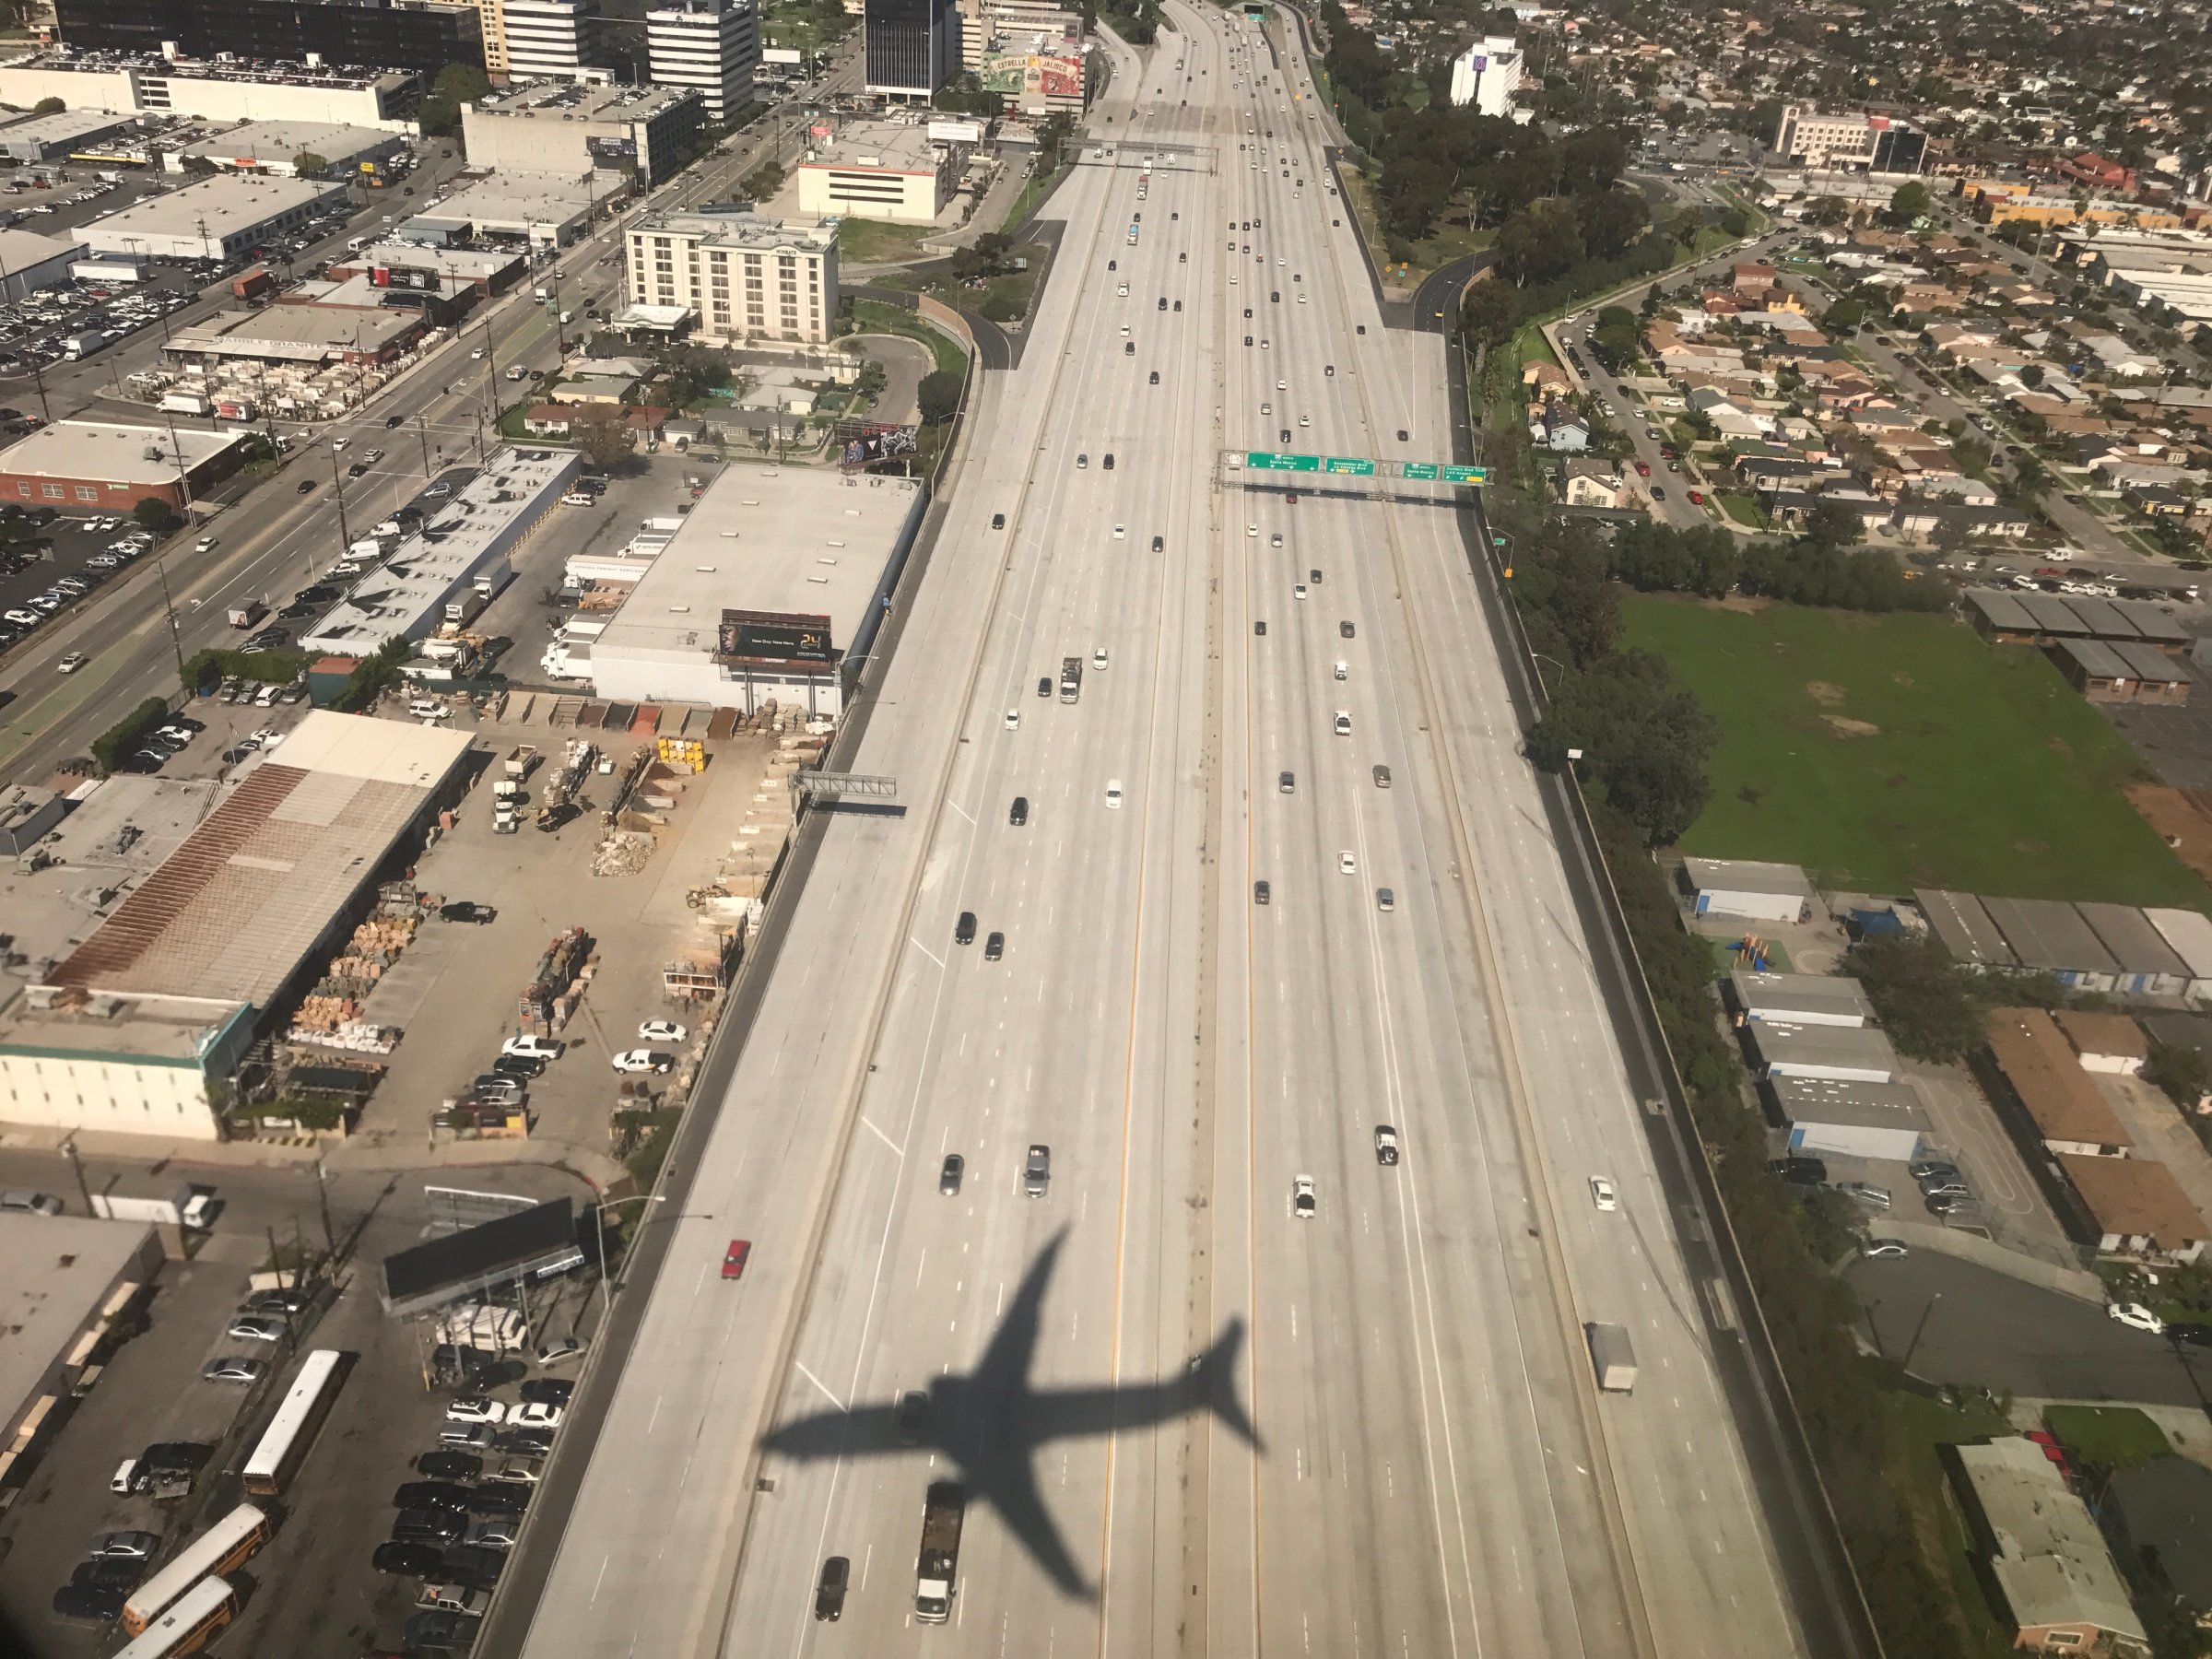 LAX airport and highway